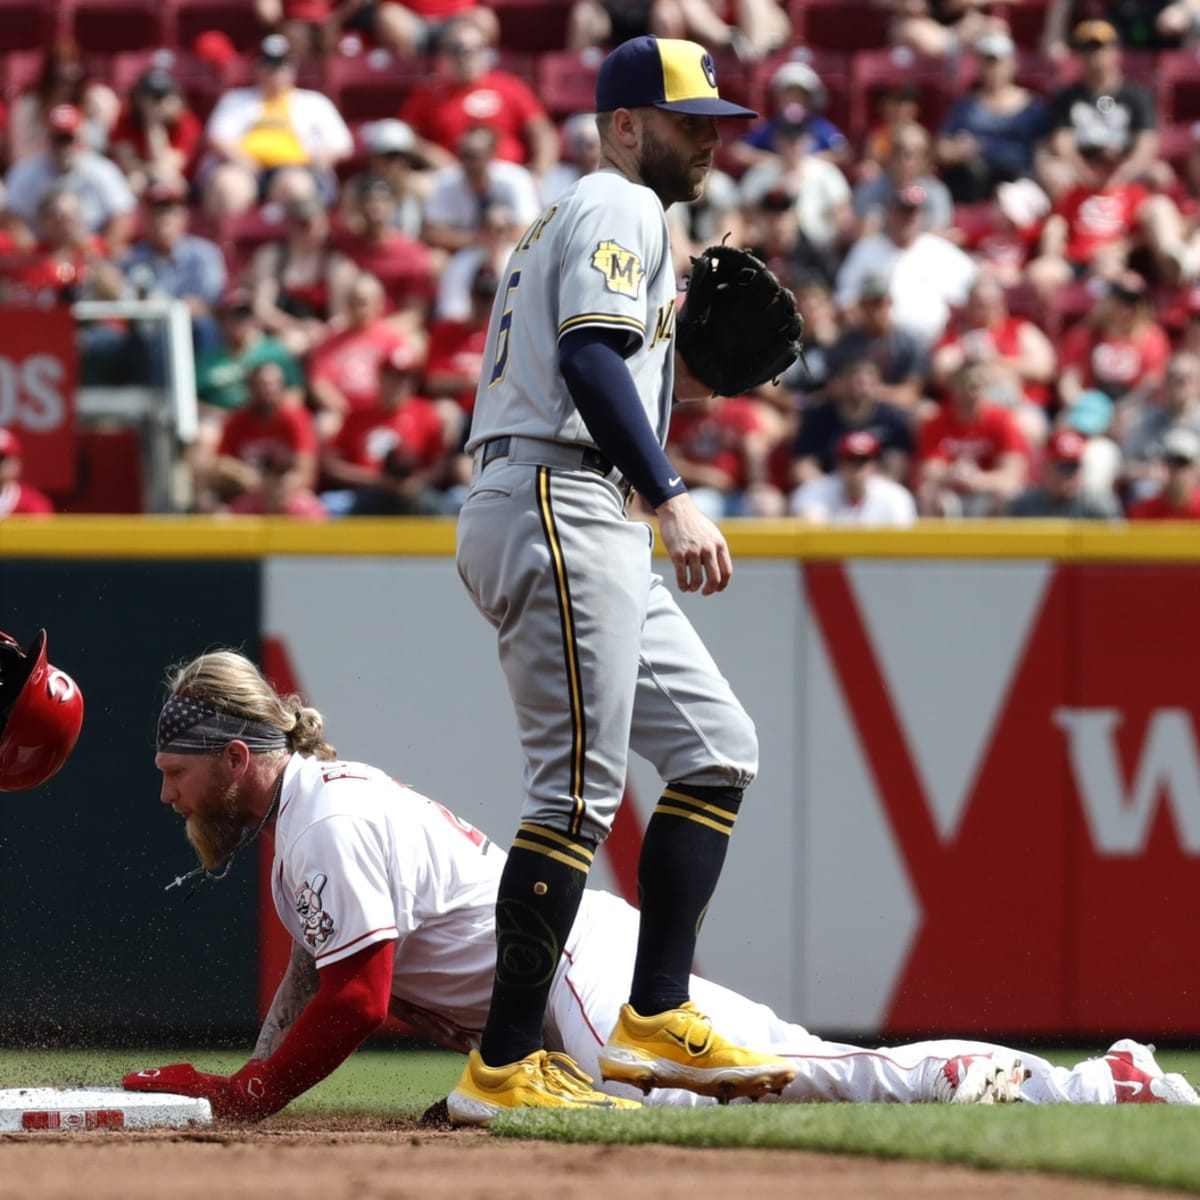 Why Cincinnati Reds can't count on help Brewers gave rivals last year